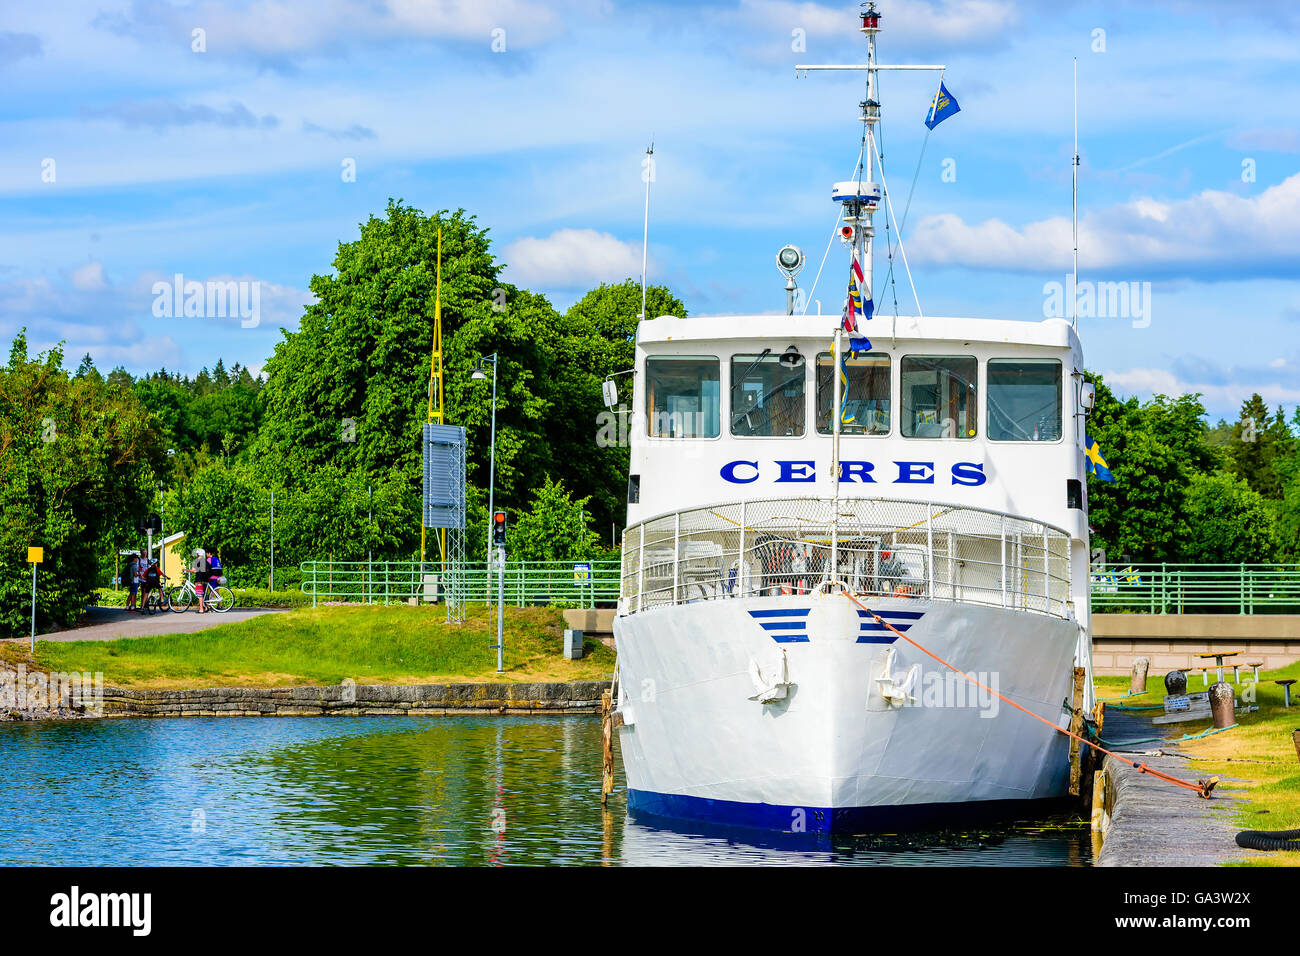 Borensberg, Sweden - June 20, 2016: The passenger ship Ceres moored dockside with movable bridge in the background. Stock Photo